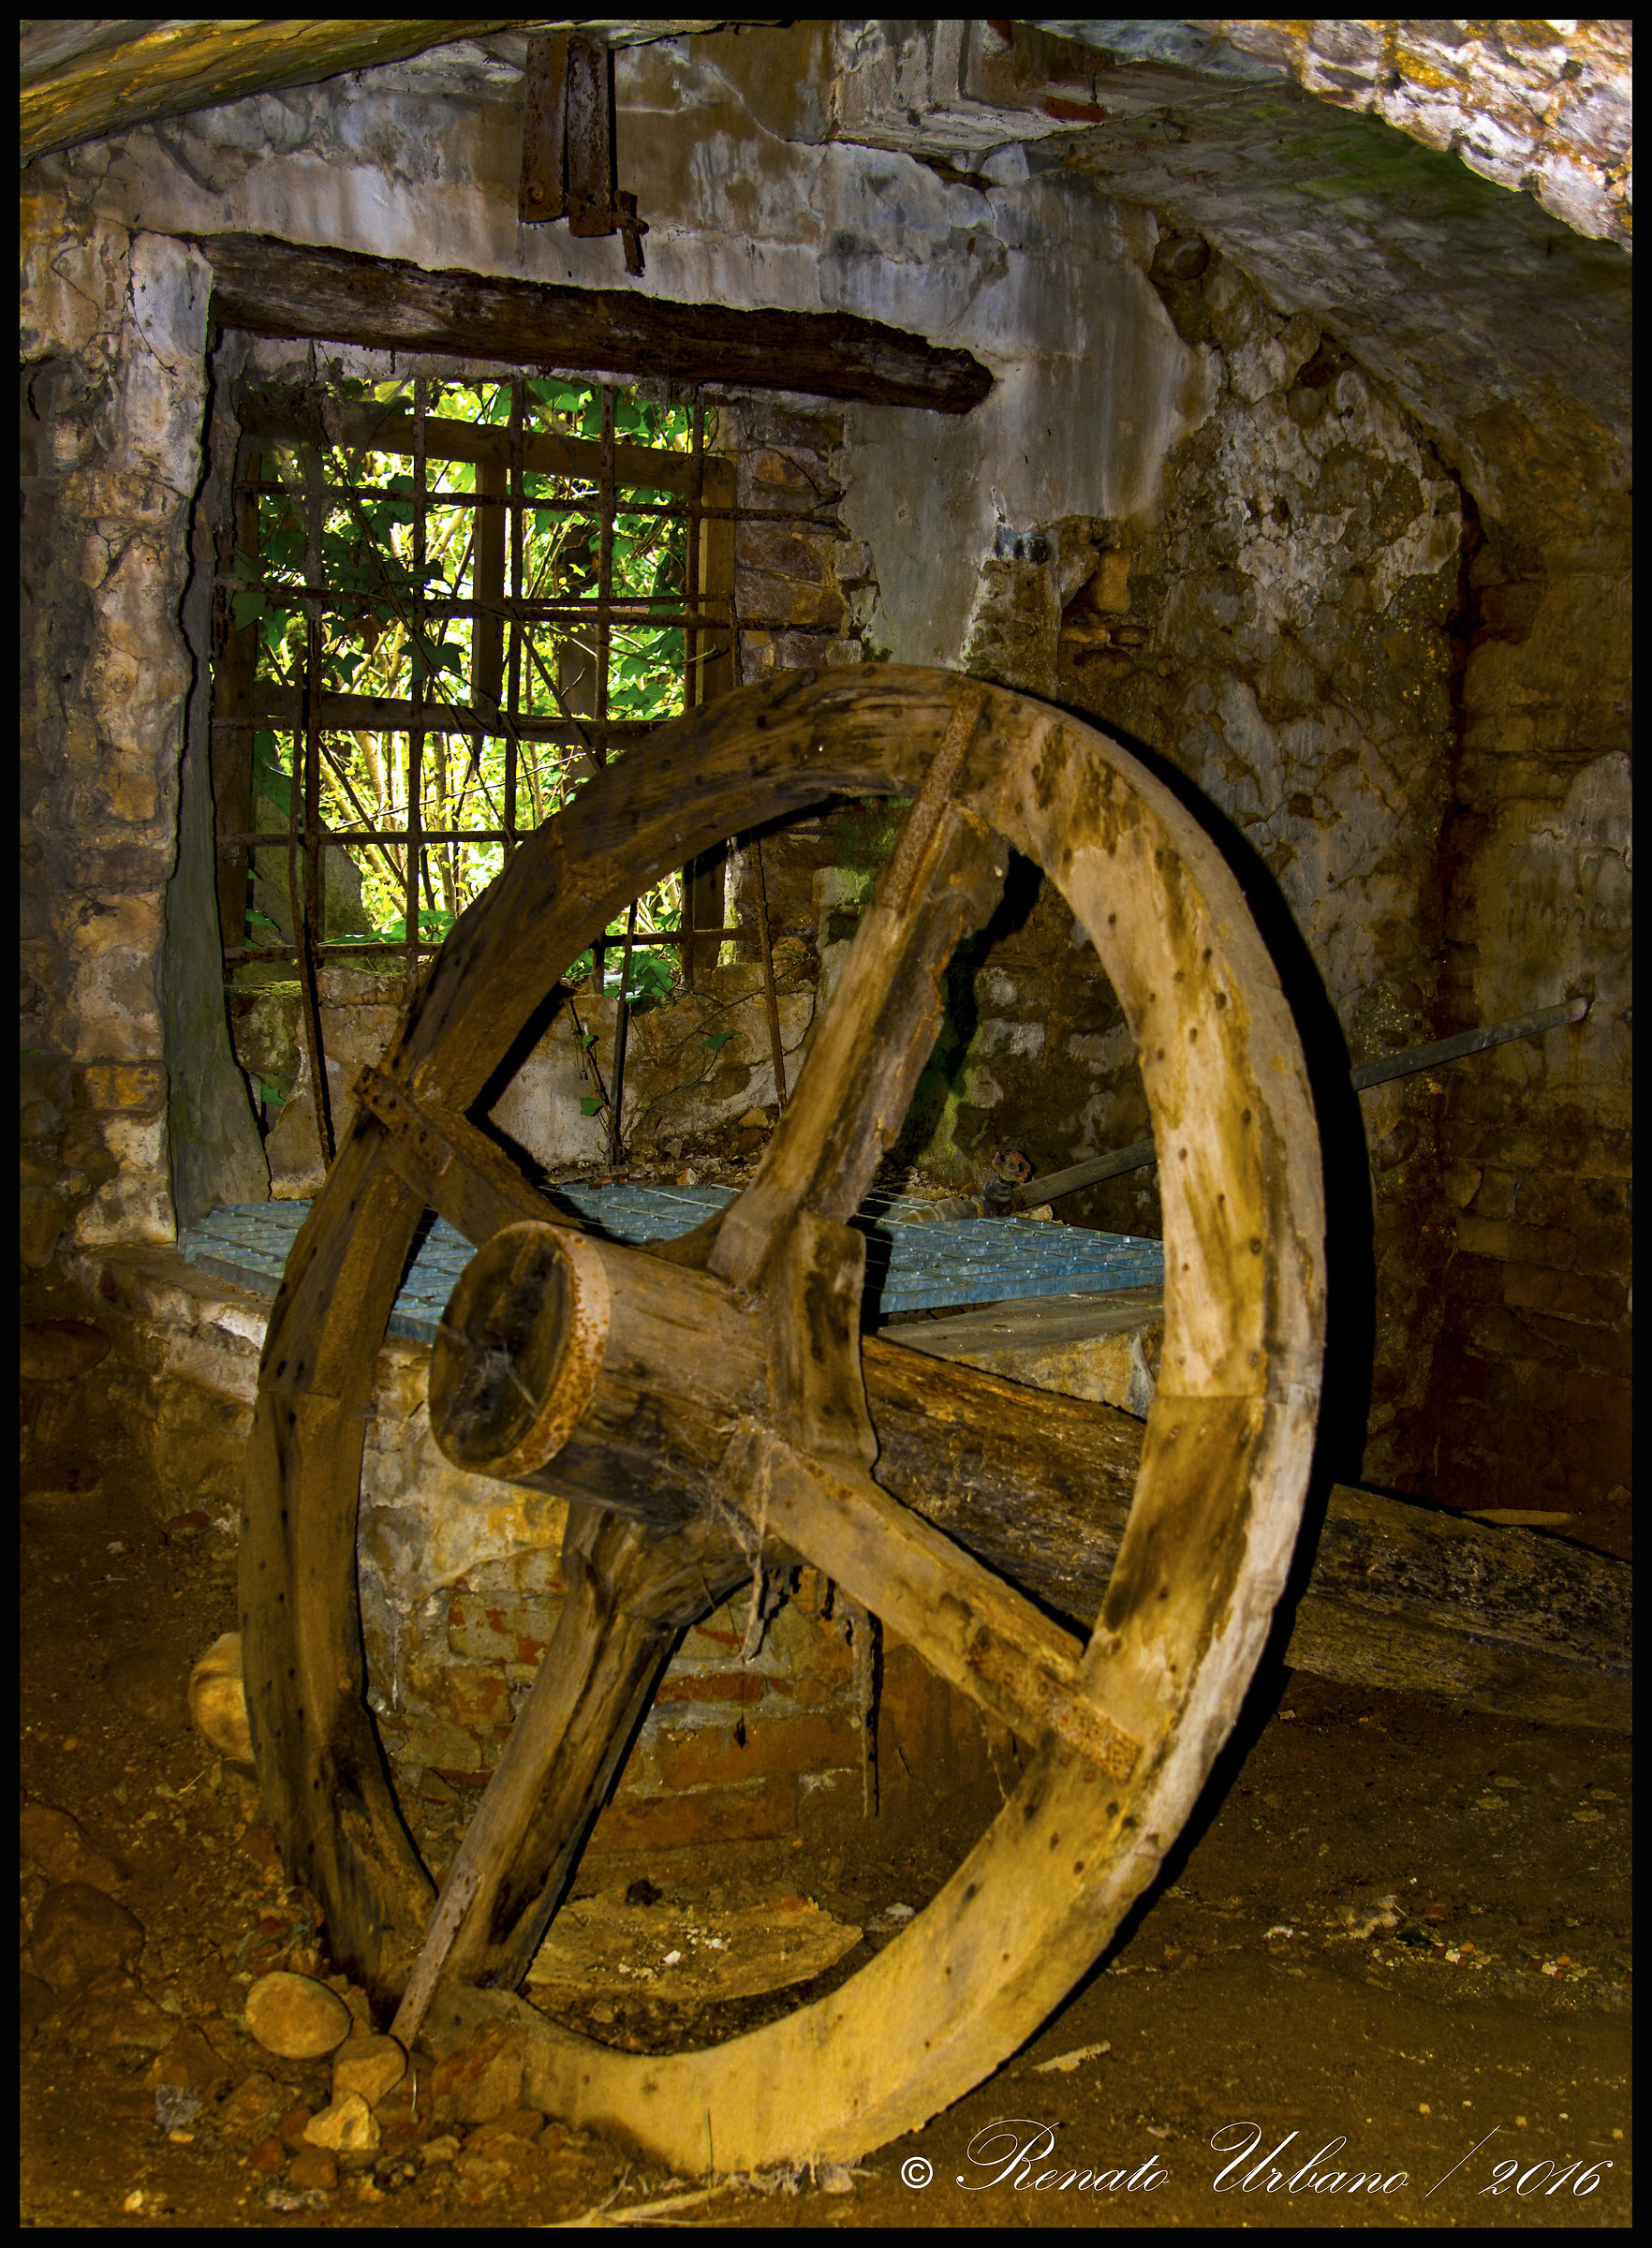 The old wheel...